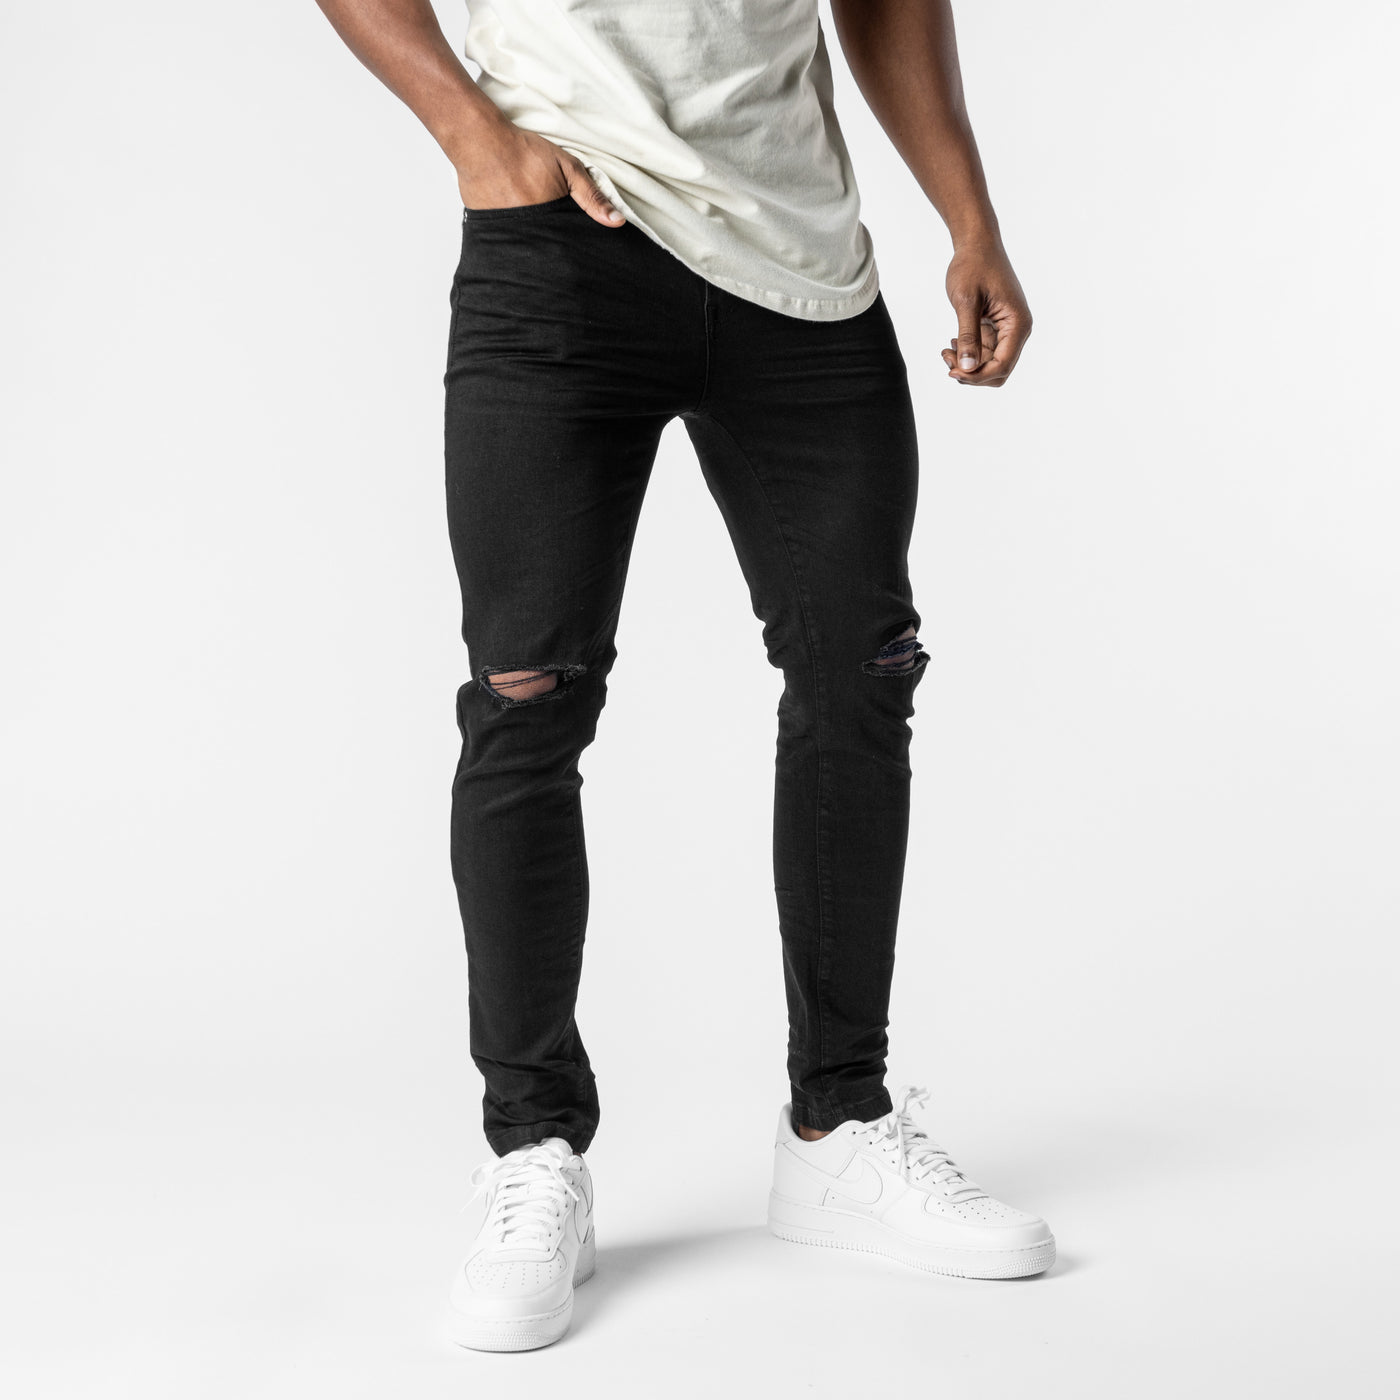 Ripped - Jeans for Men – Solona Designs